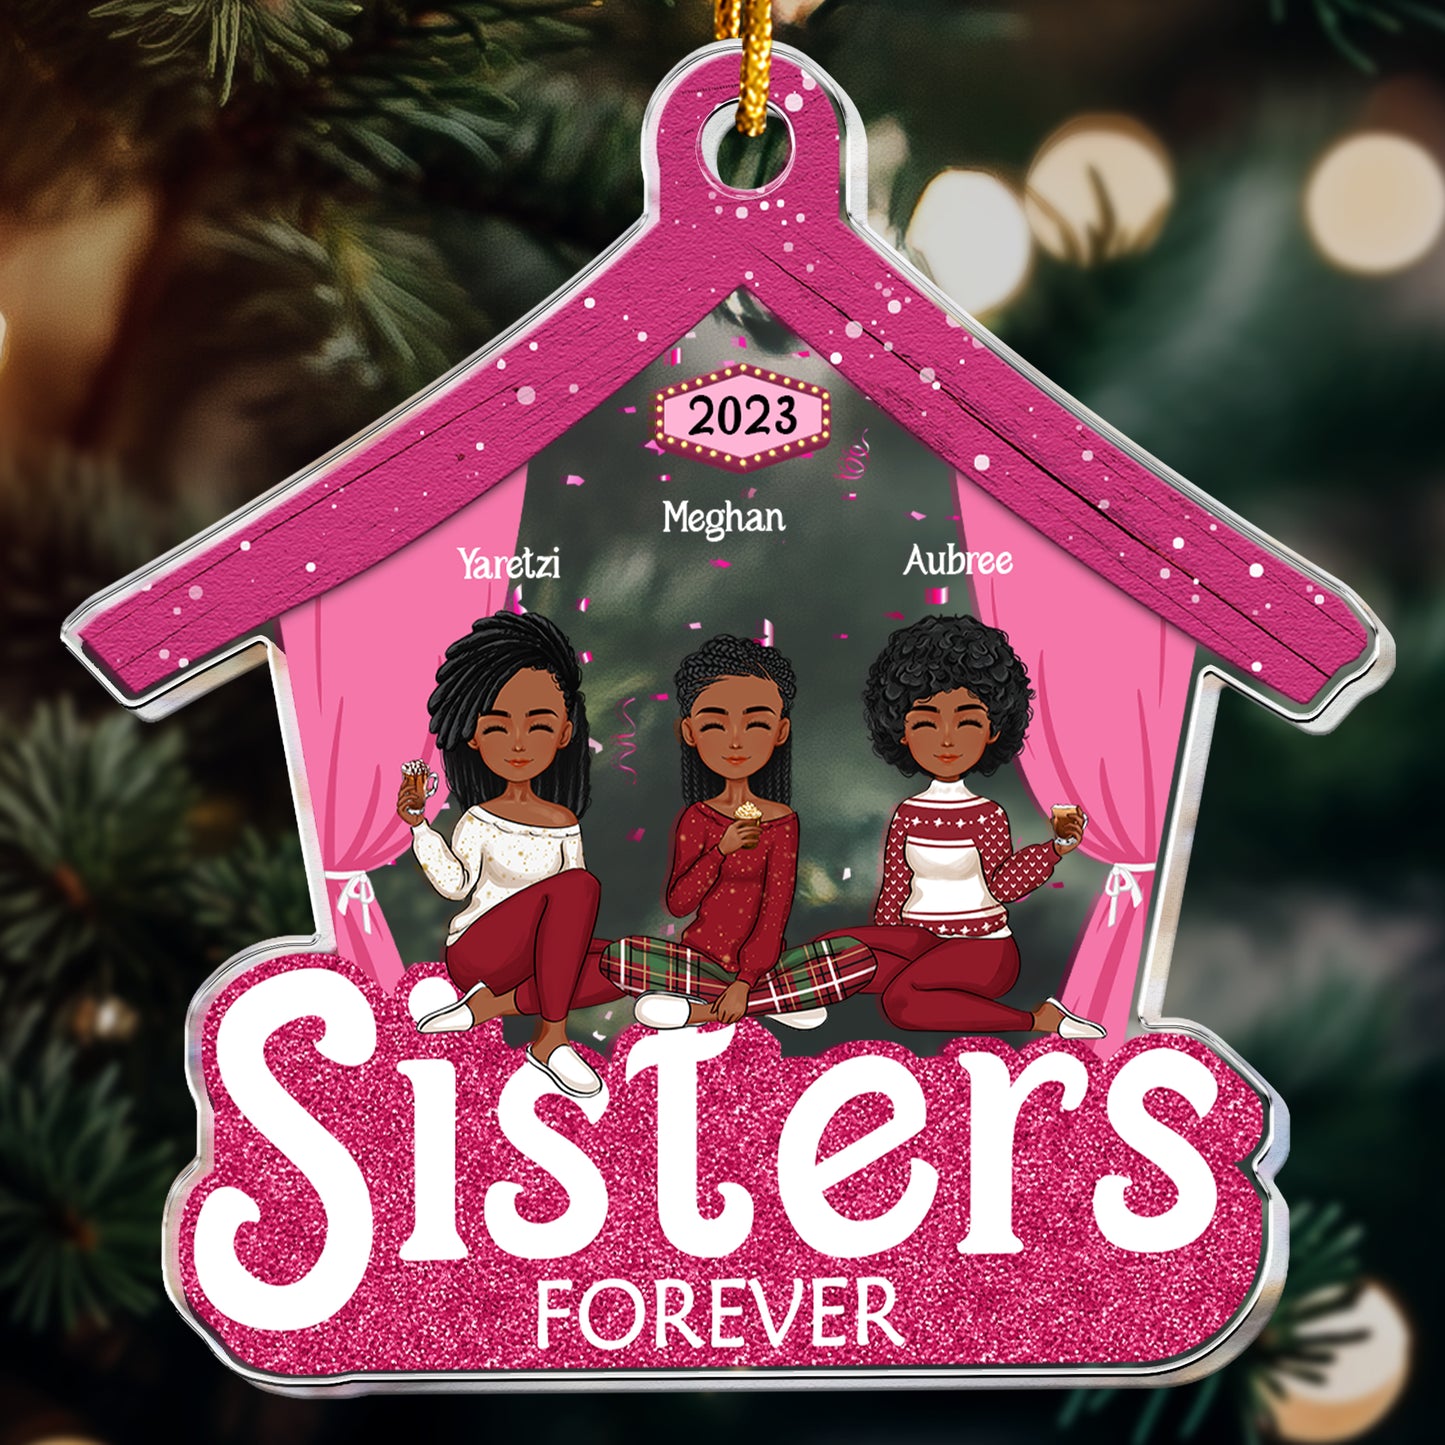 Friends - Besties Forever - Personalized Acrylic Ornament